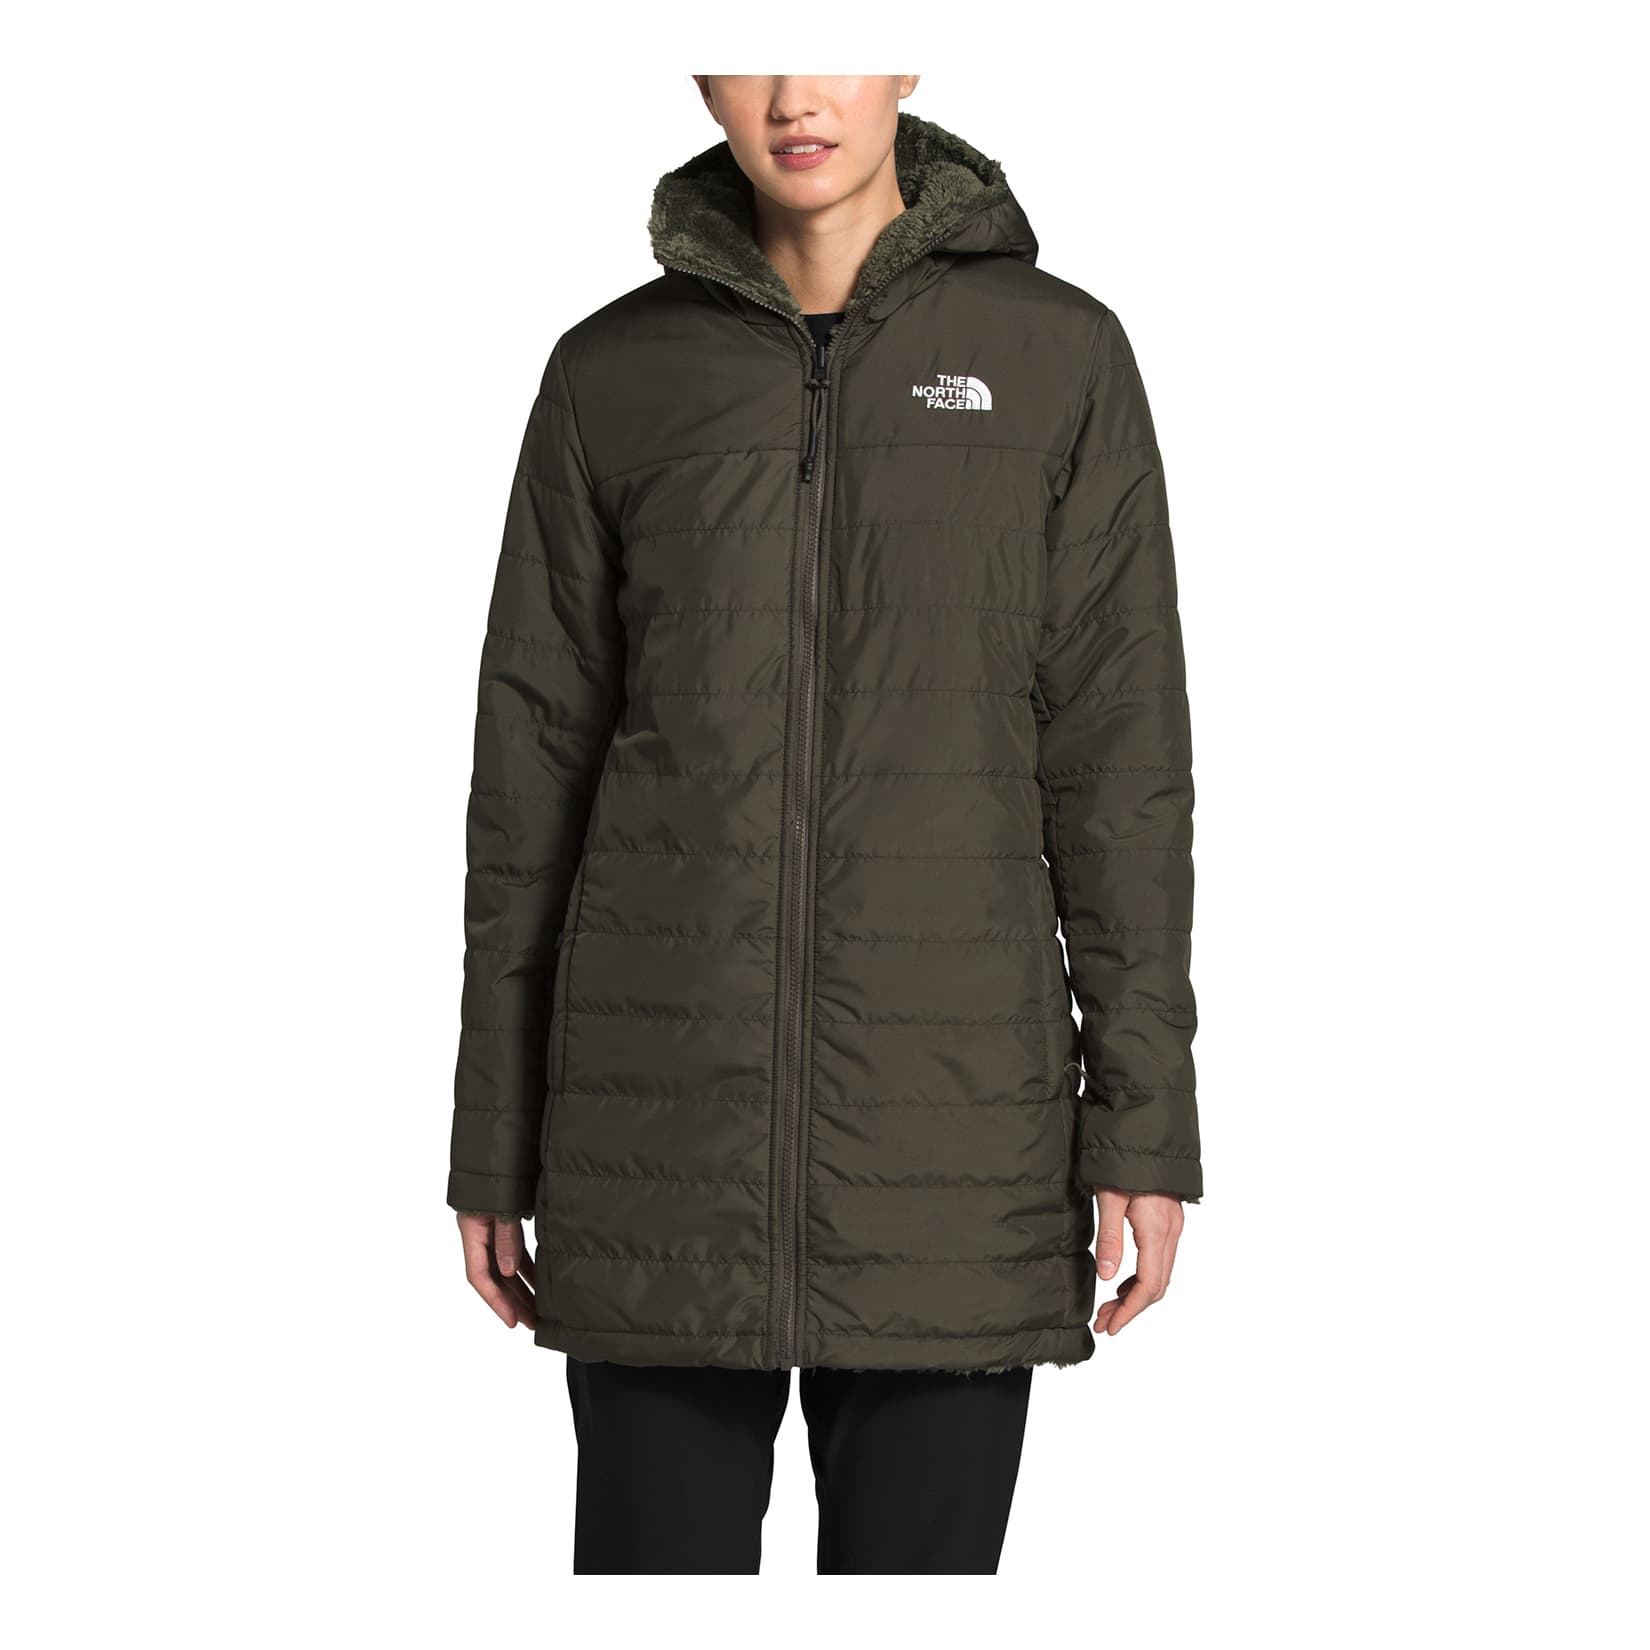 The North Face® Women’s Mossbud Insulated Reversible Parka - Taupe Green